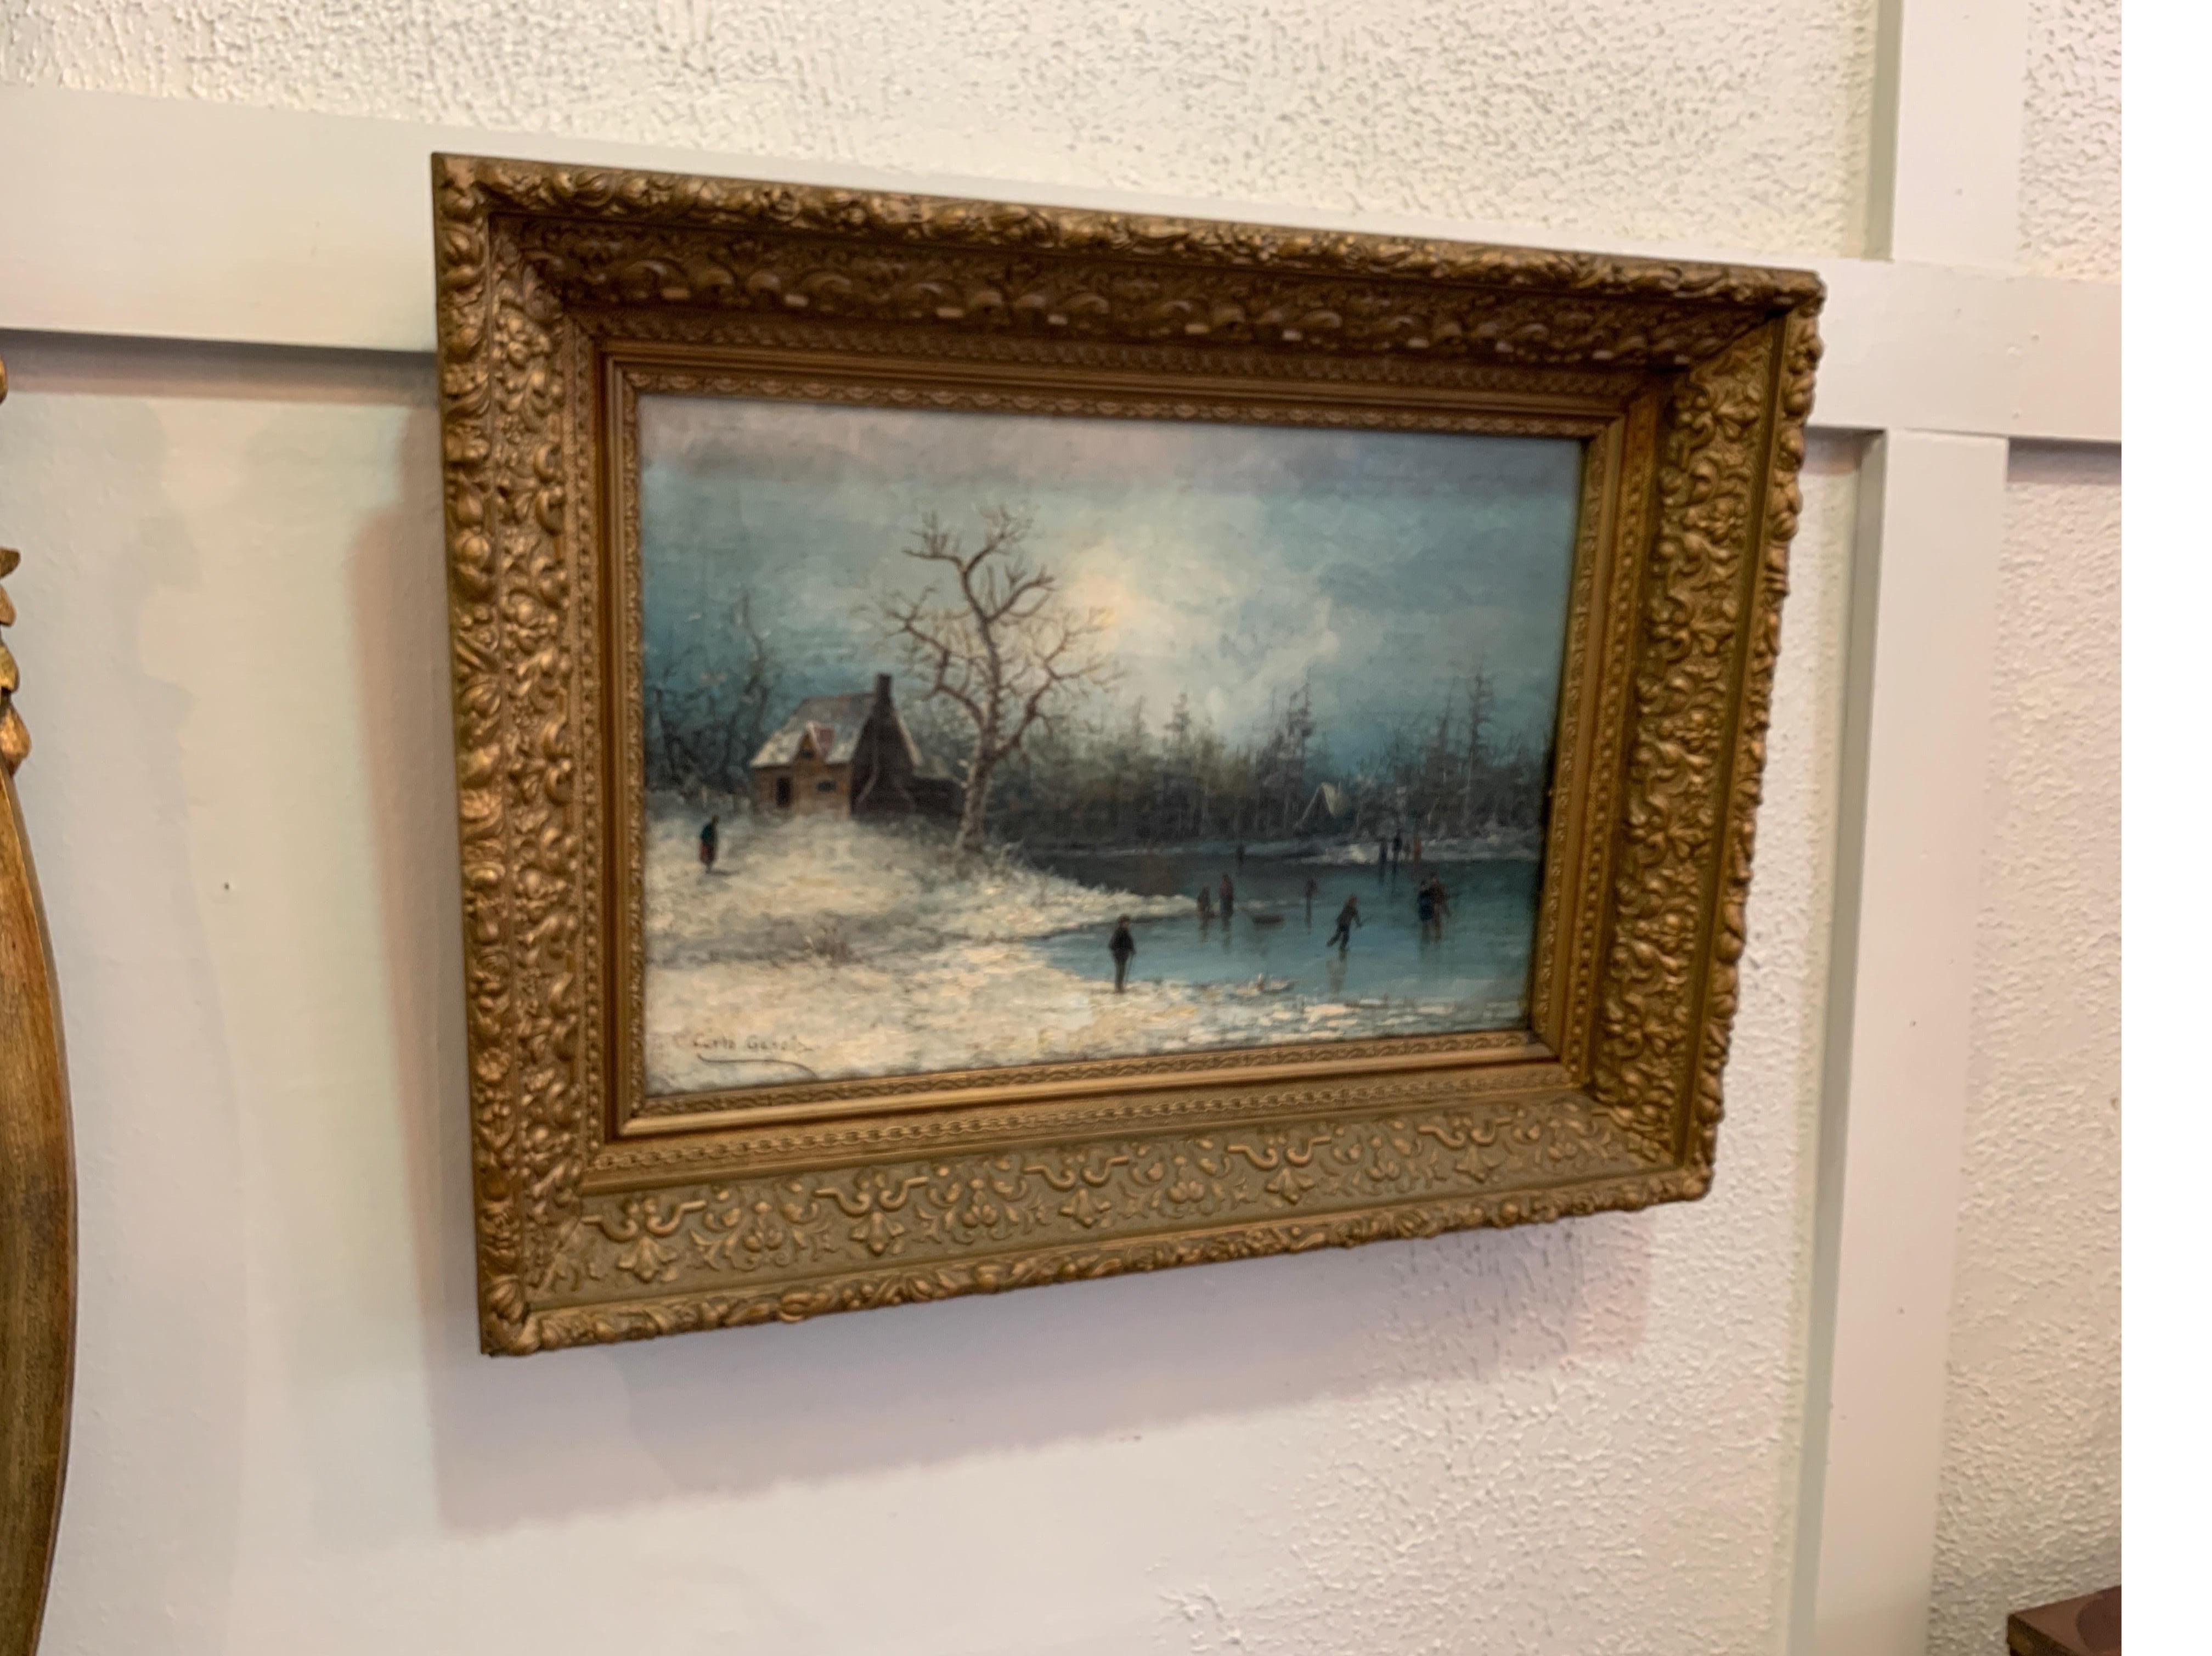 19th century oil on canvas artist signed, skating on the lake
Dimensions: 23.5